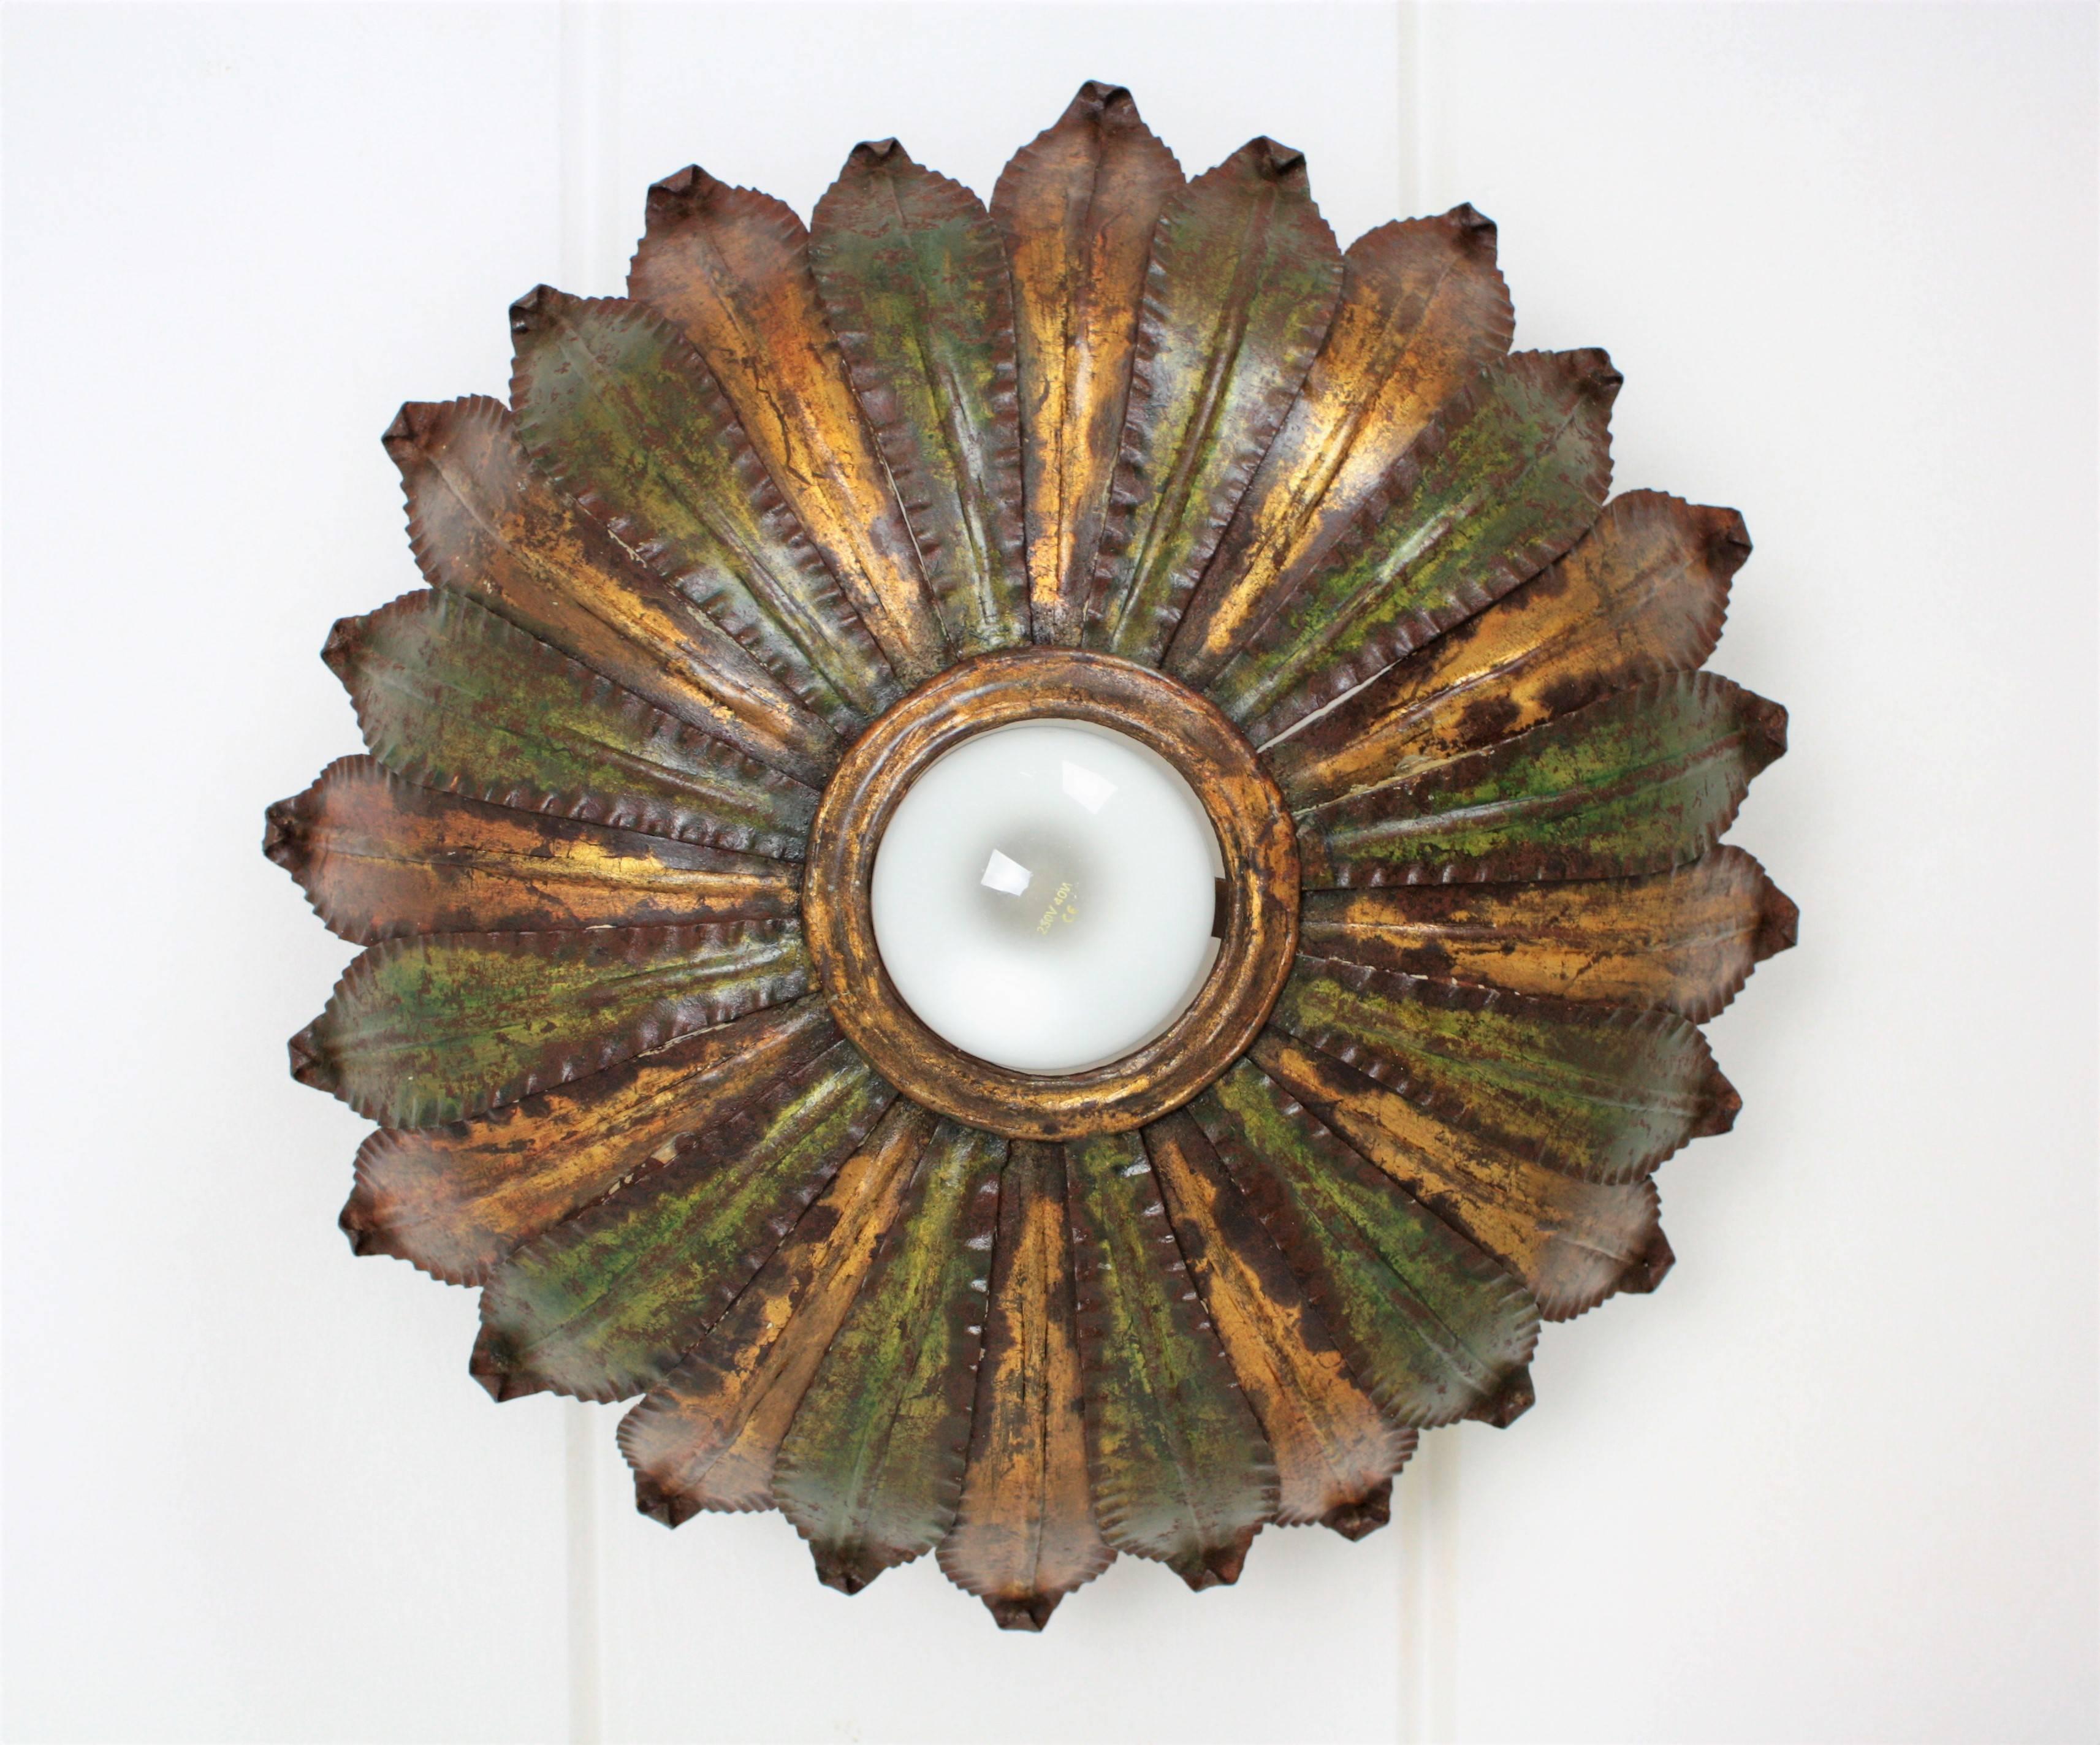 Amazing hand-hammered iron sunburst light fixture with a highly decorative original patina in gold leaf and green color with rusty accents. The two tones finish and its shape make this ceiling sconce different and unique. It could work also as wall